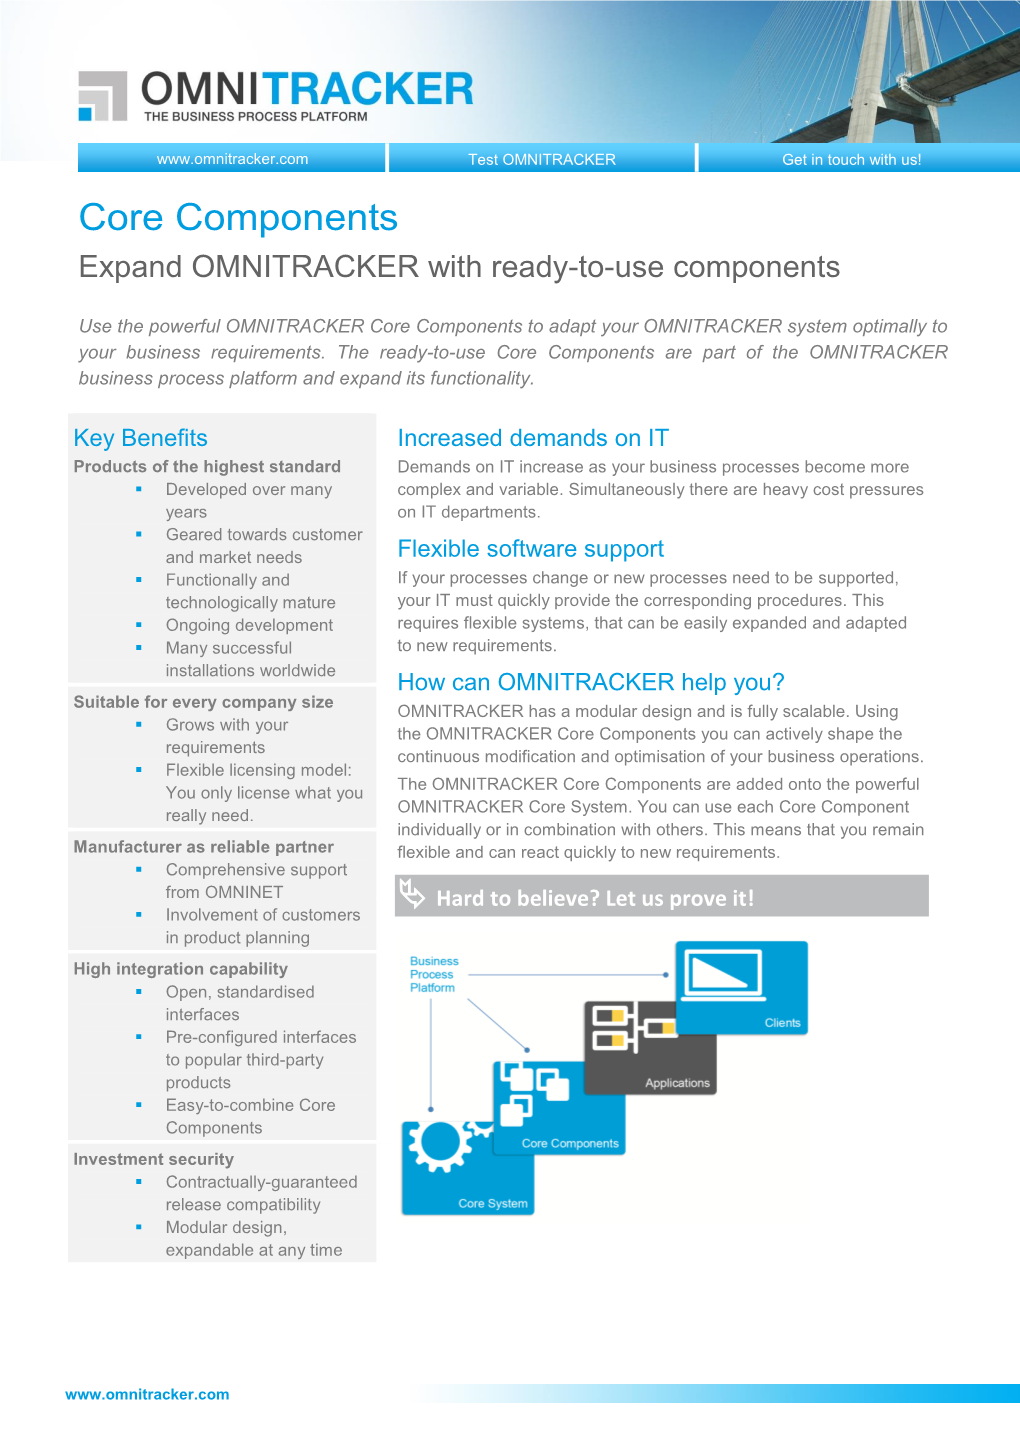 OMNITRACKER Core Components to Adapt Your OMNITRACKER System Optimally to Your Business Requirements